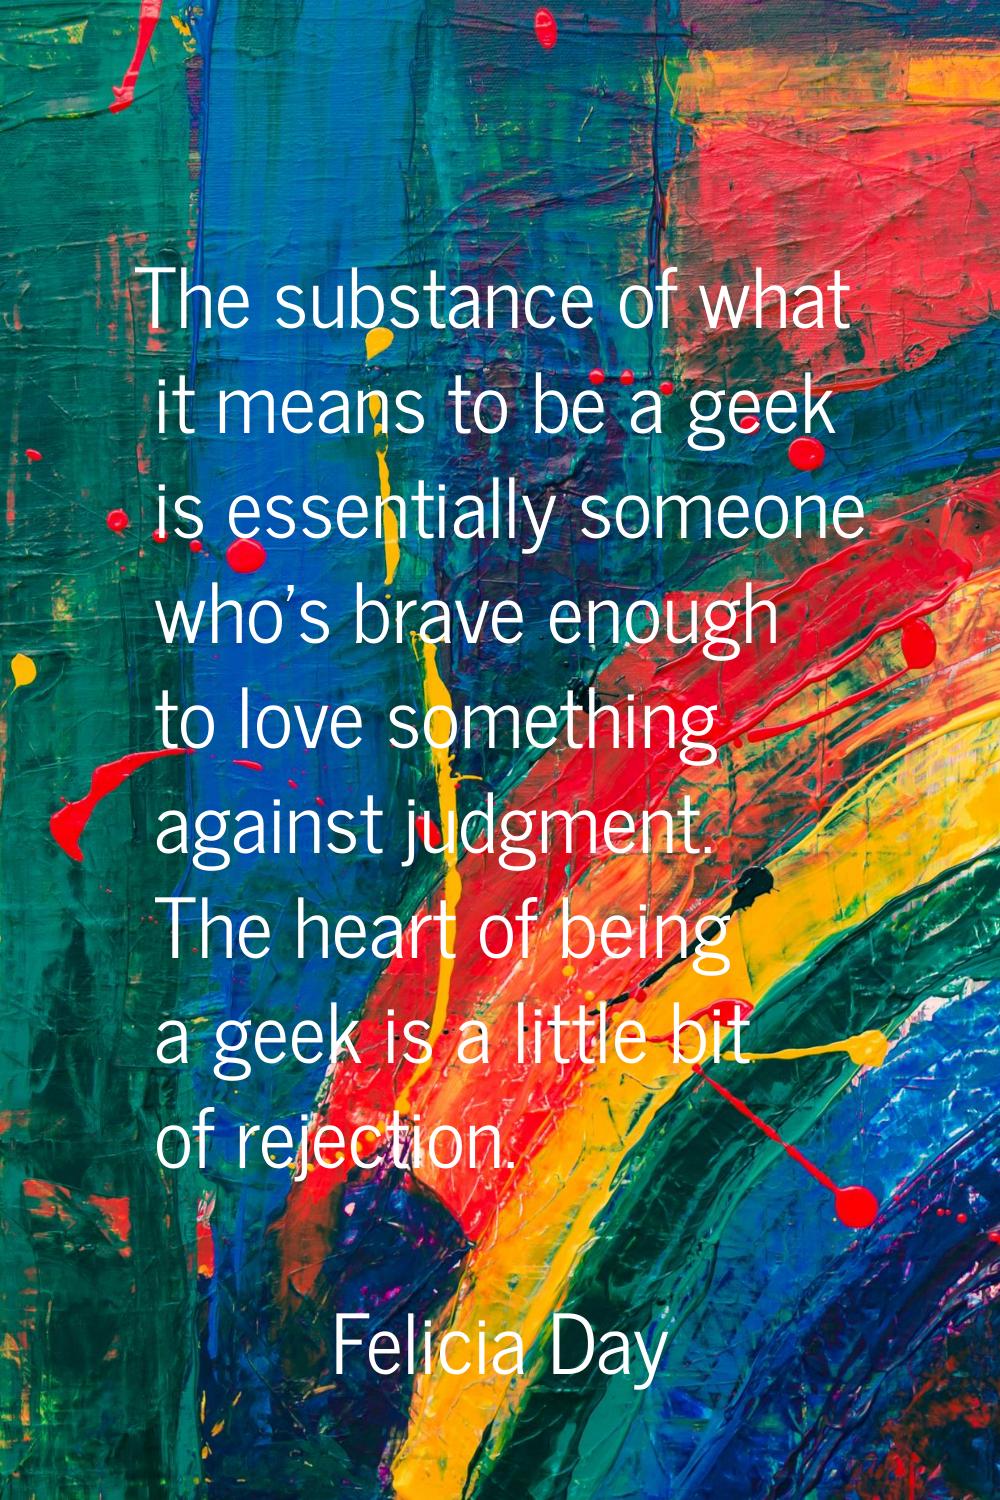 The substance of what it means to be a geek is essentially someone who's brave enough to love somet